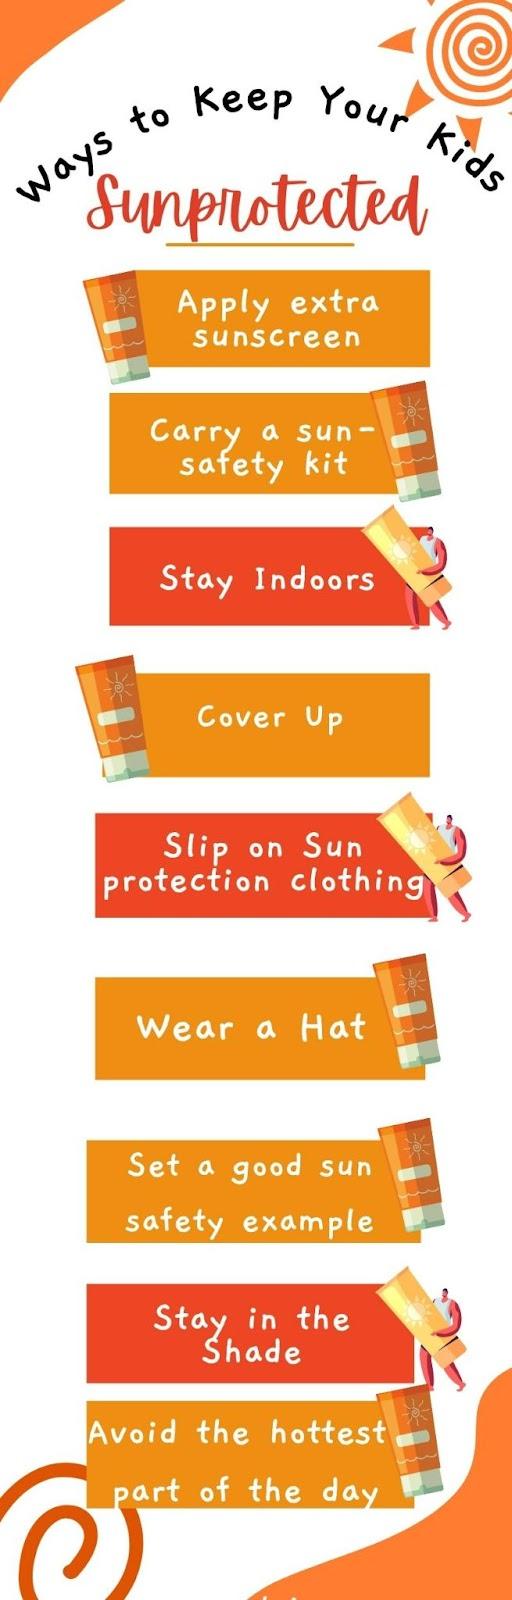 Ways To Keep Your Kids Protected from the Sun